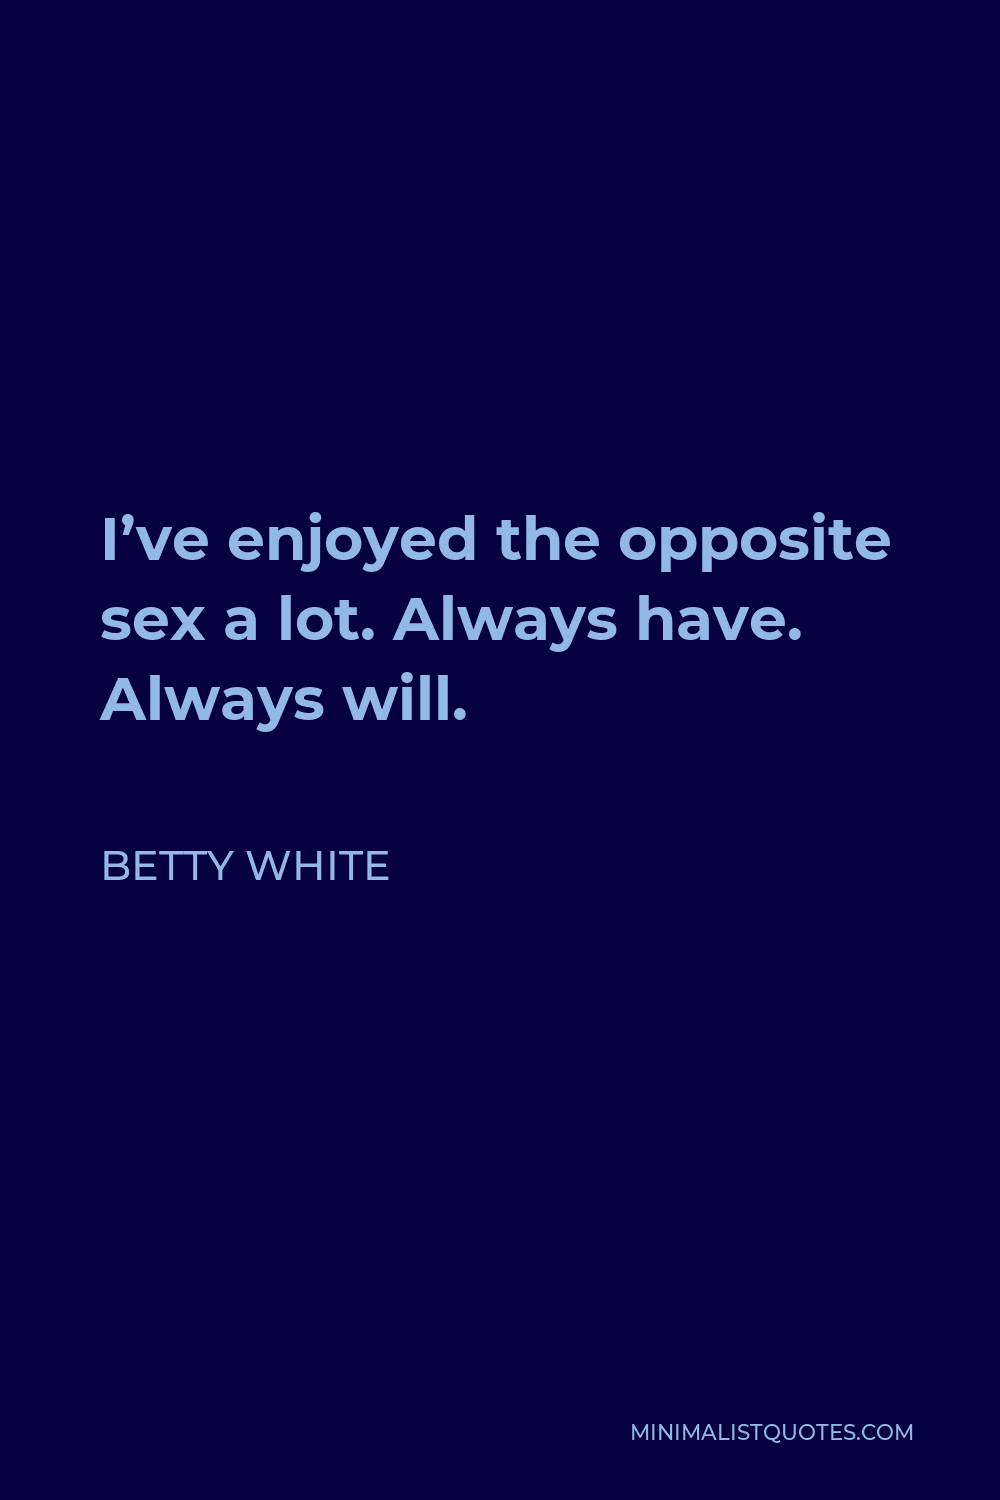 Betty White Quote - I’ve enjoyed the opposite sex a lot. Always have. Always will.